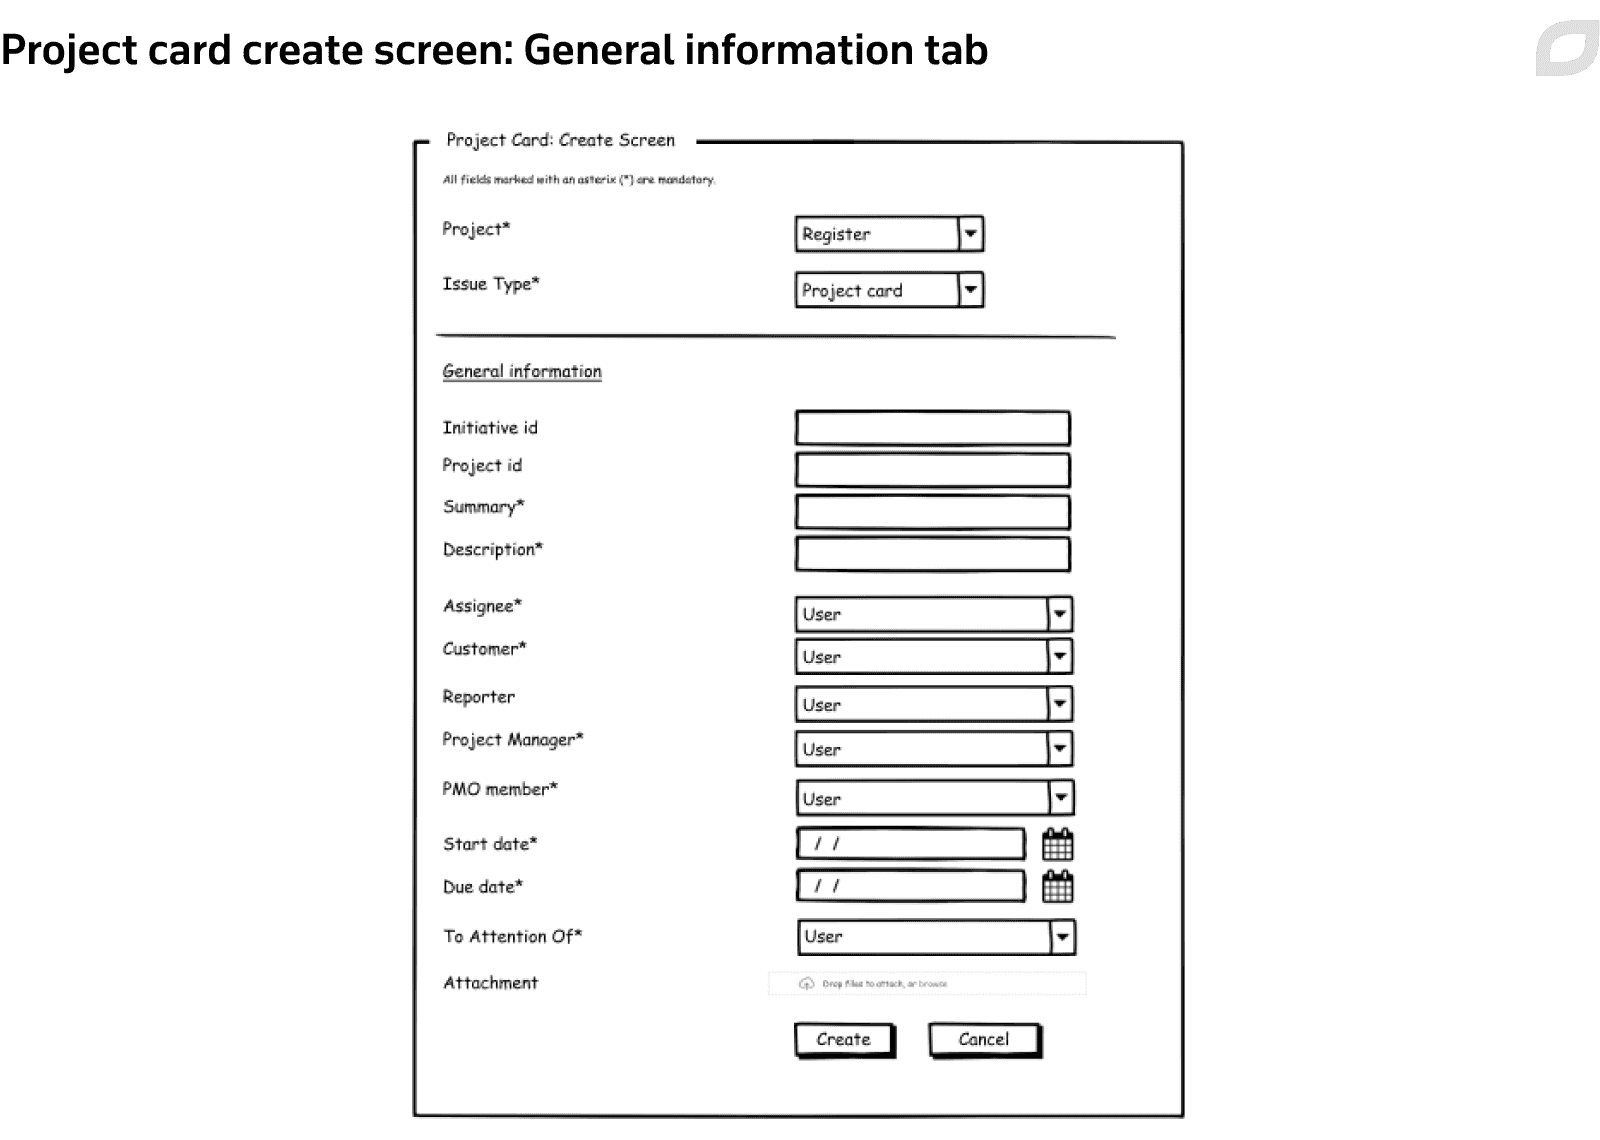 Project card create screen: General information tab